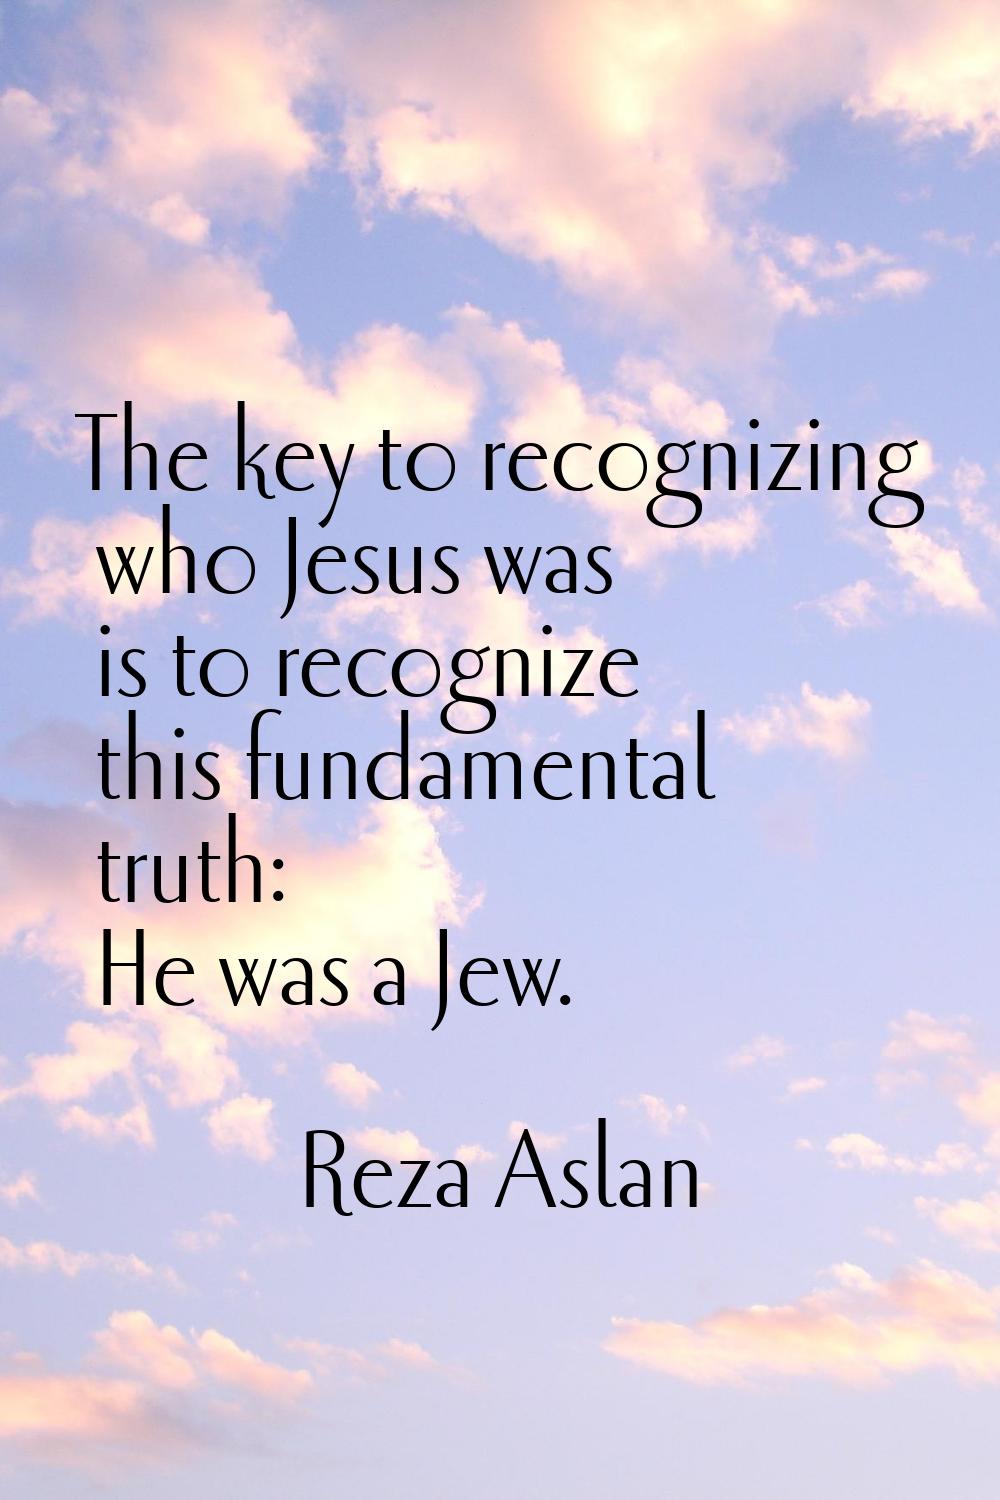 The key to recognizing who Jesus was is to recognize this fundamental truth: He was a Jew.